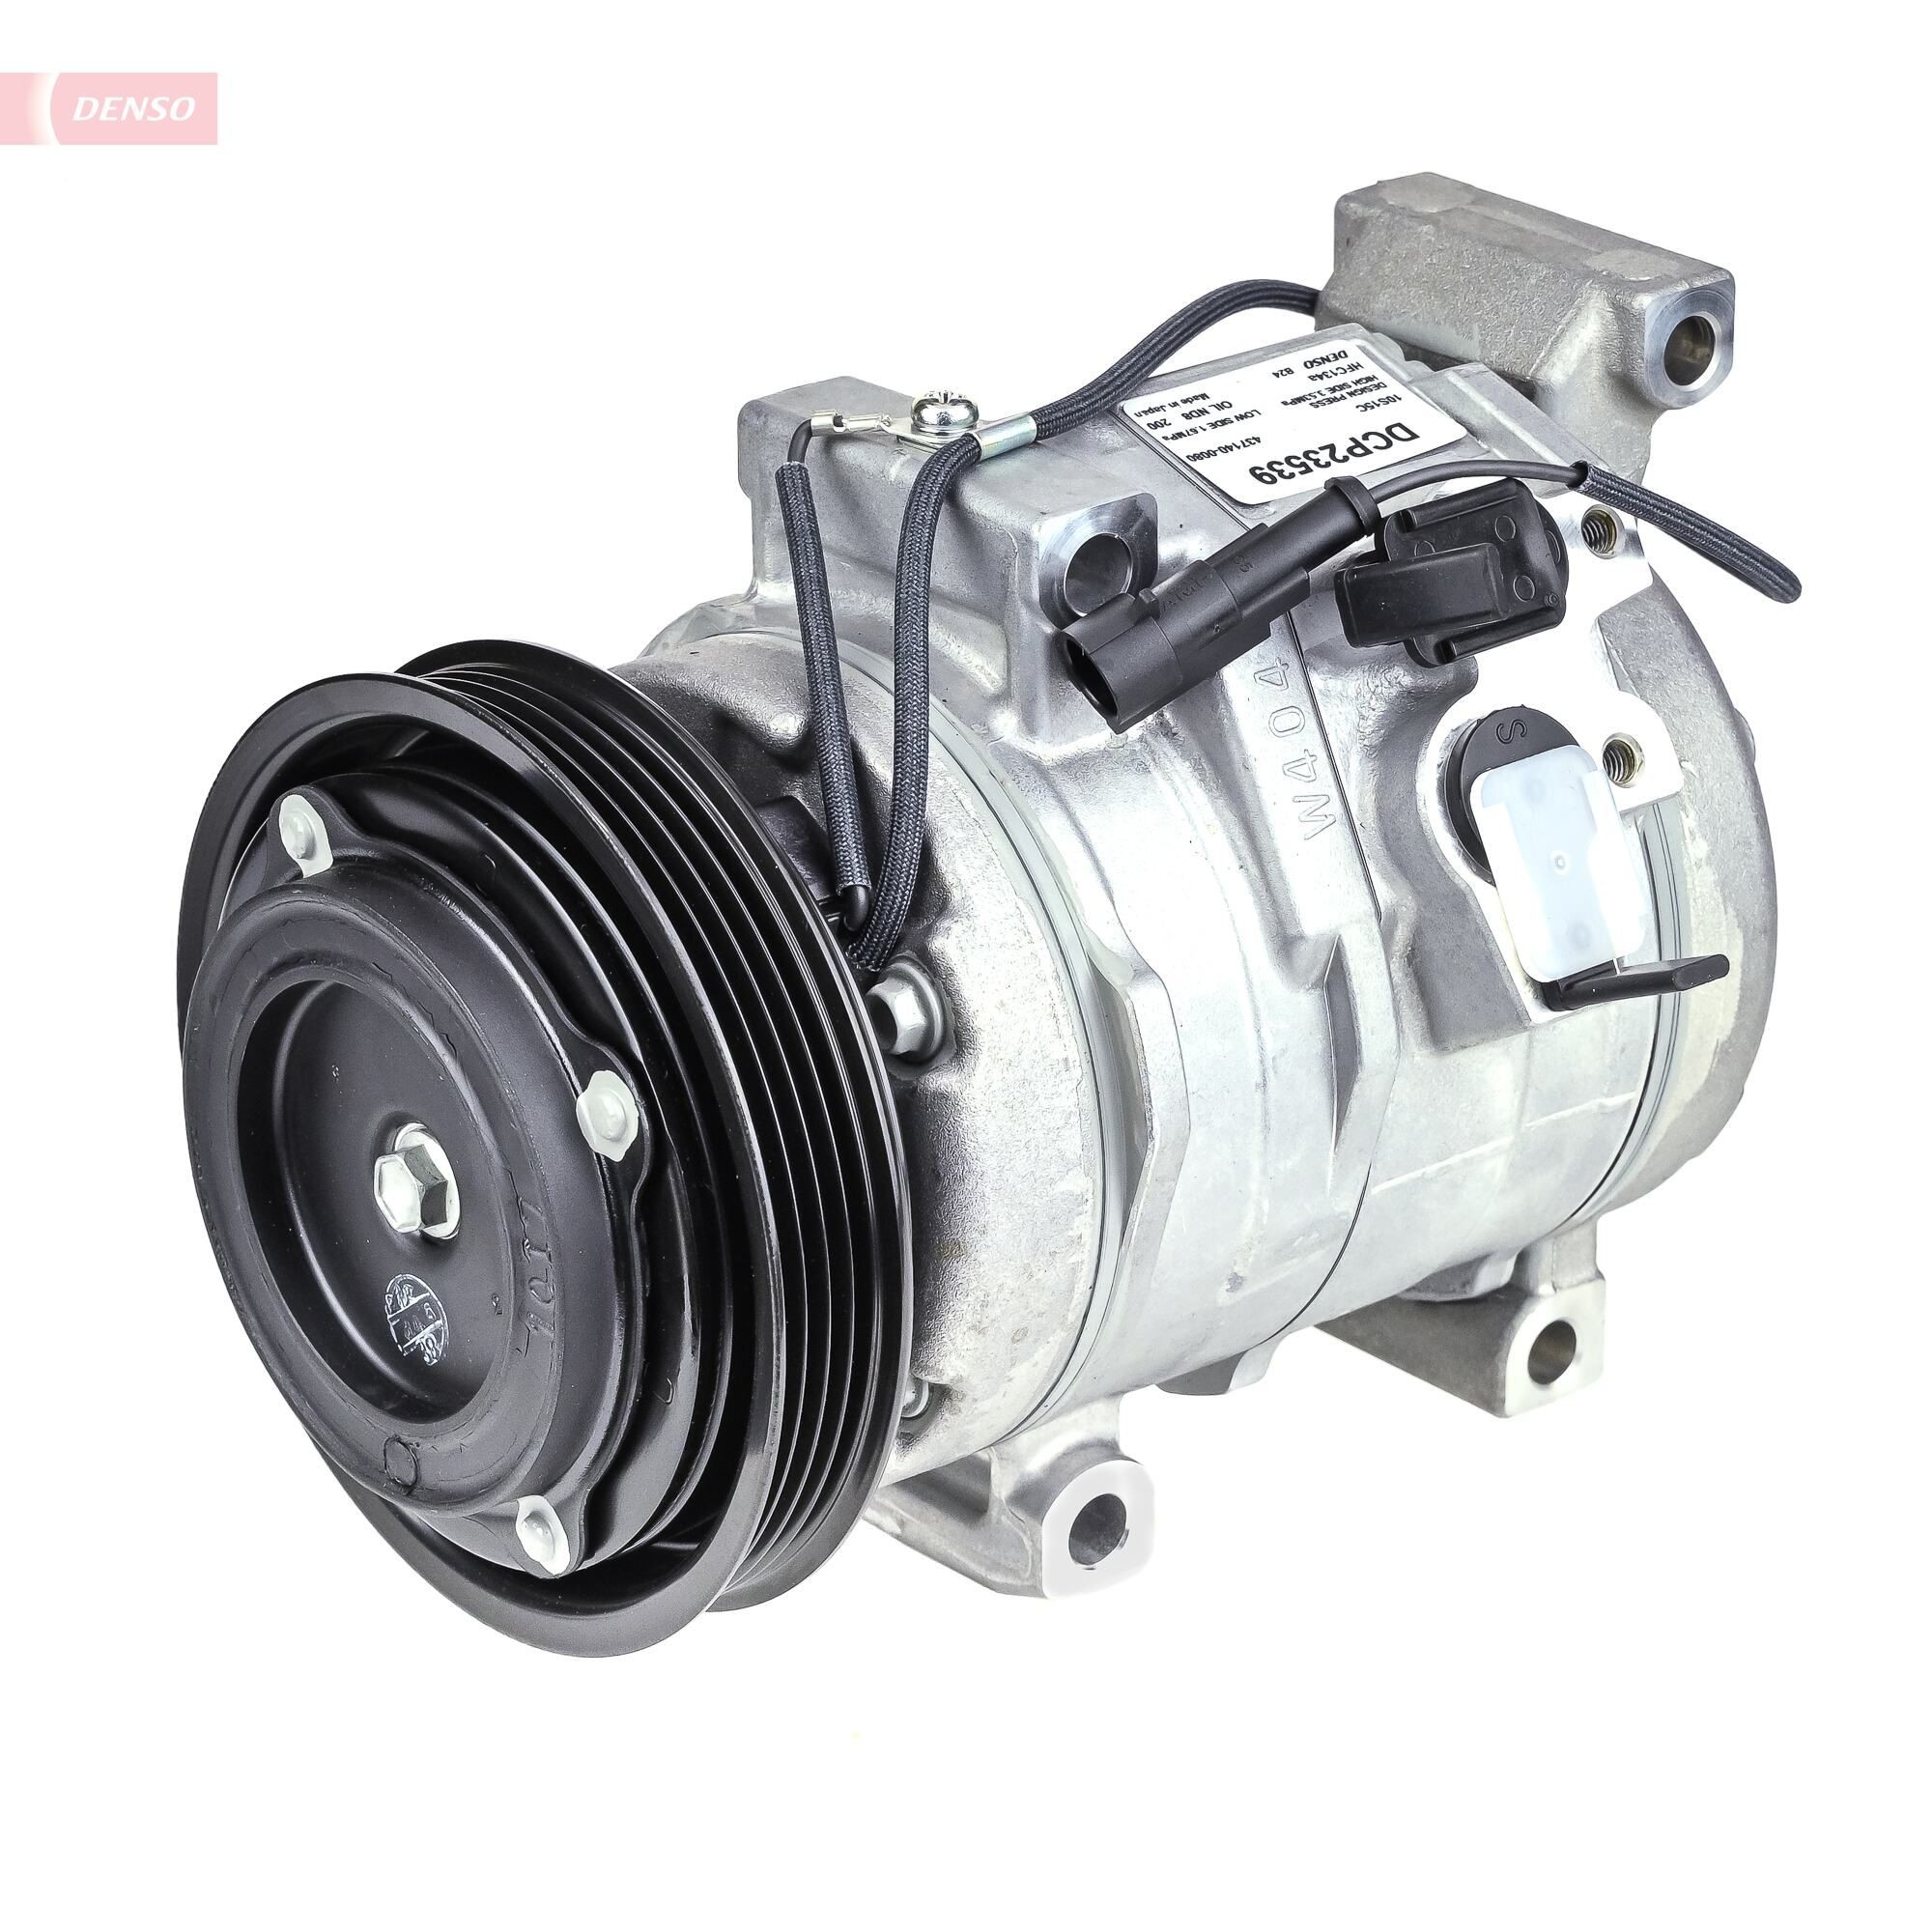 DENSO DCP23539 Air conditioning compressor 10S15C, 12V, PAG 46, R 134a, with magnetic clutch